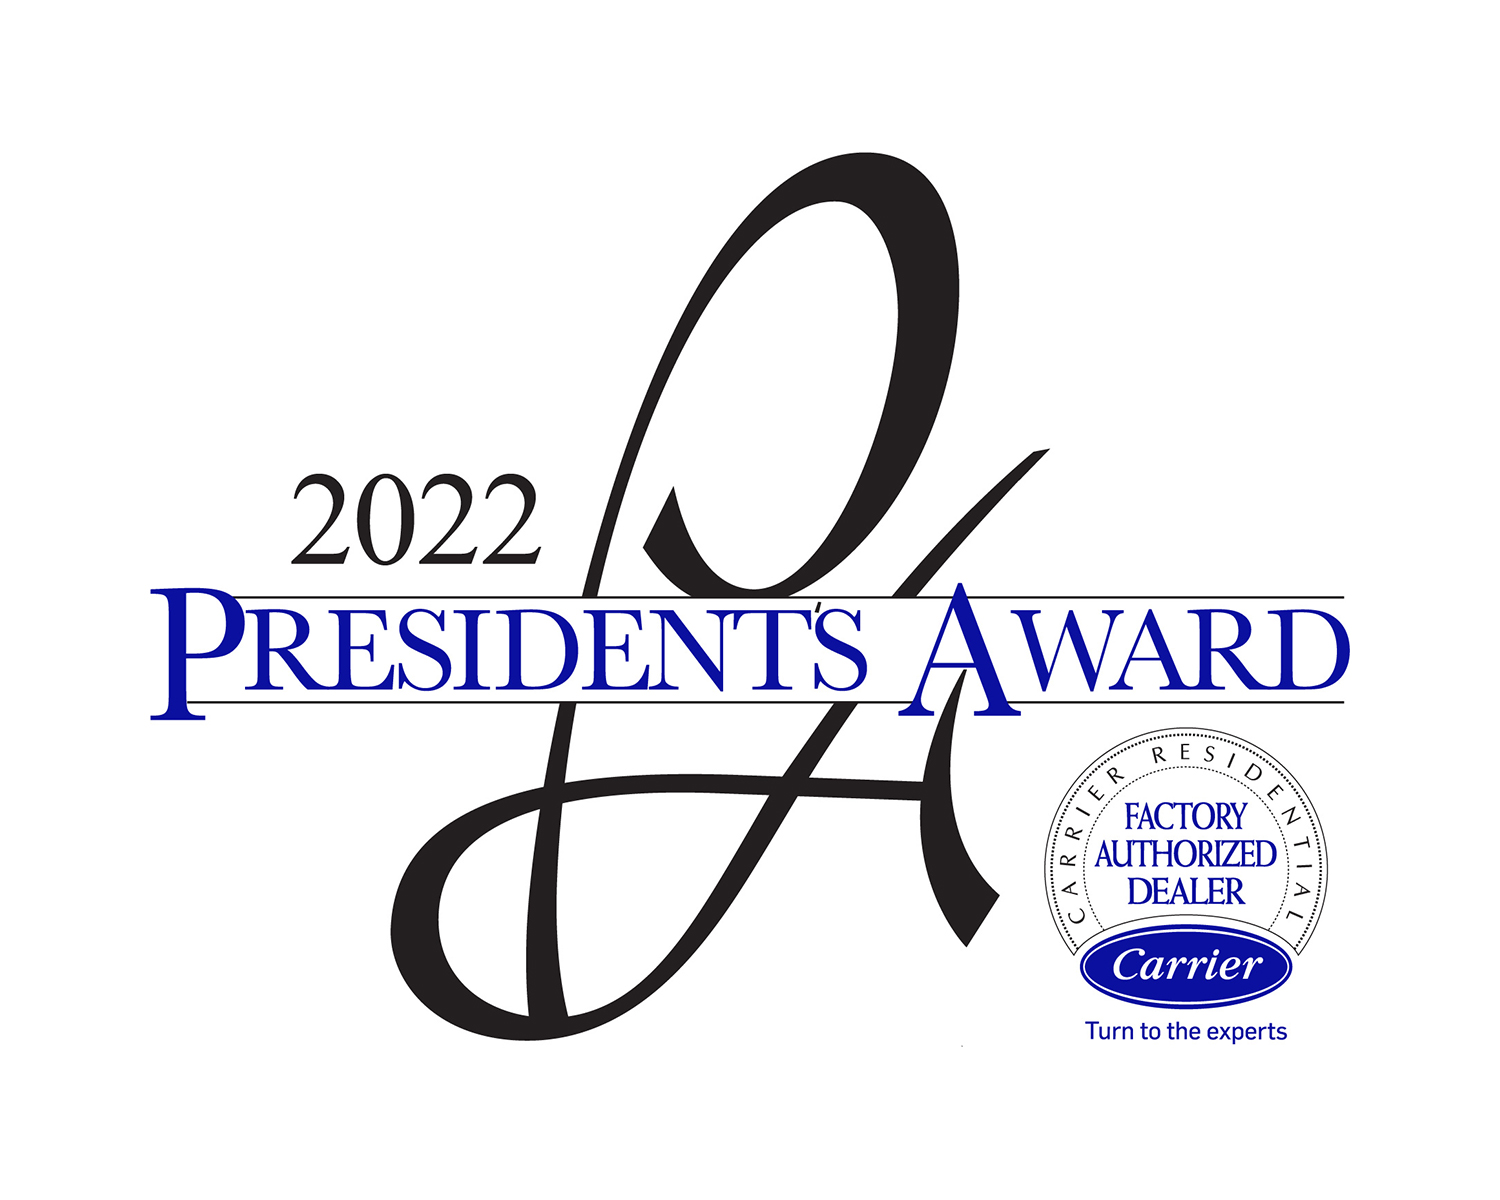 Holley Heating And Air Won the Carrier Presidential Award